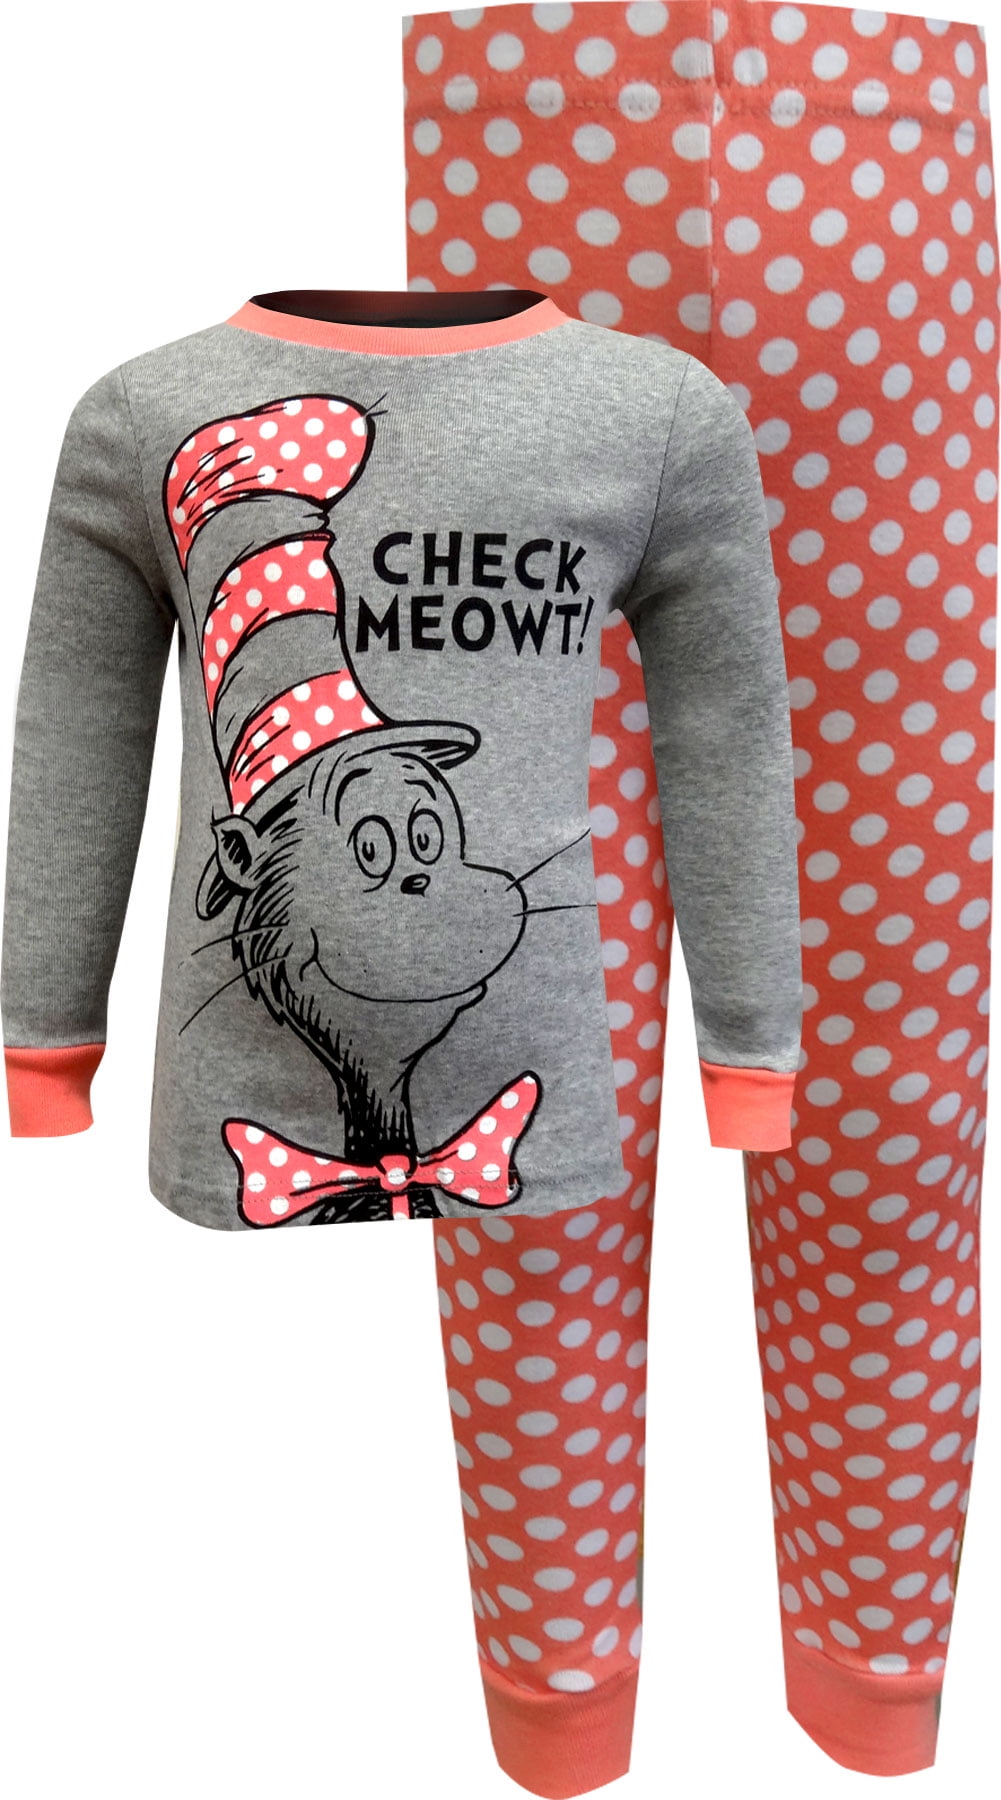 Dr. Seuss Cat in the Hat Check Meowt Girls Pajamas